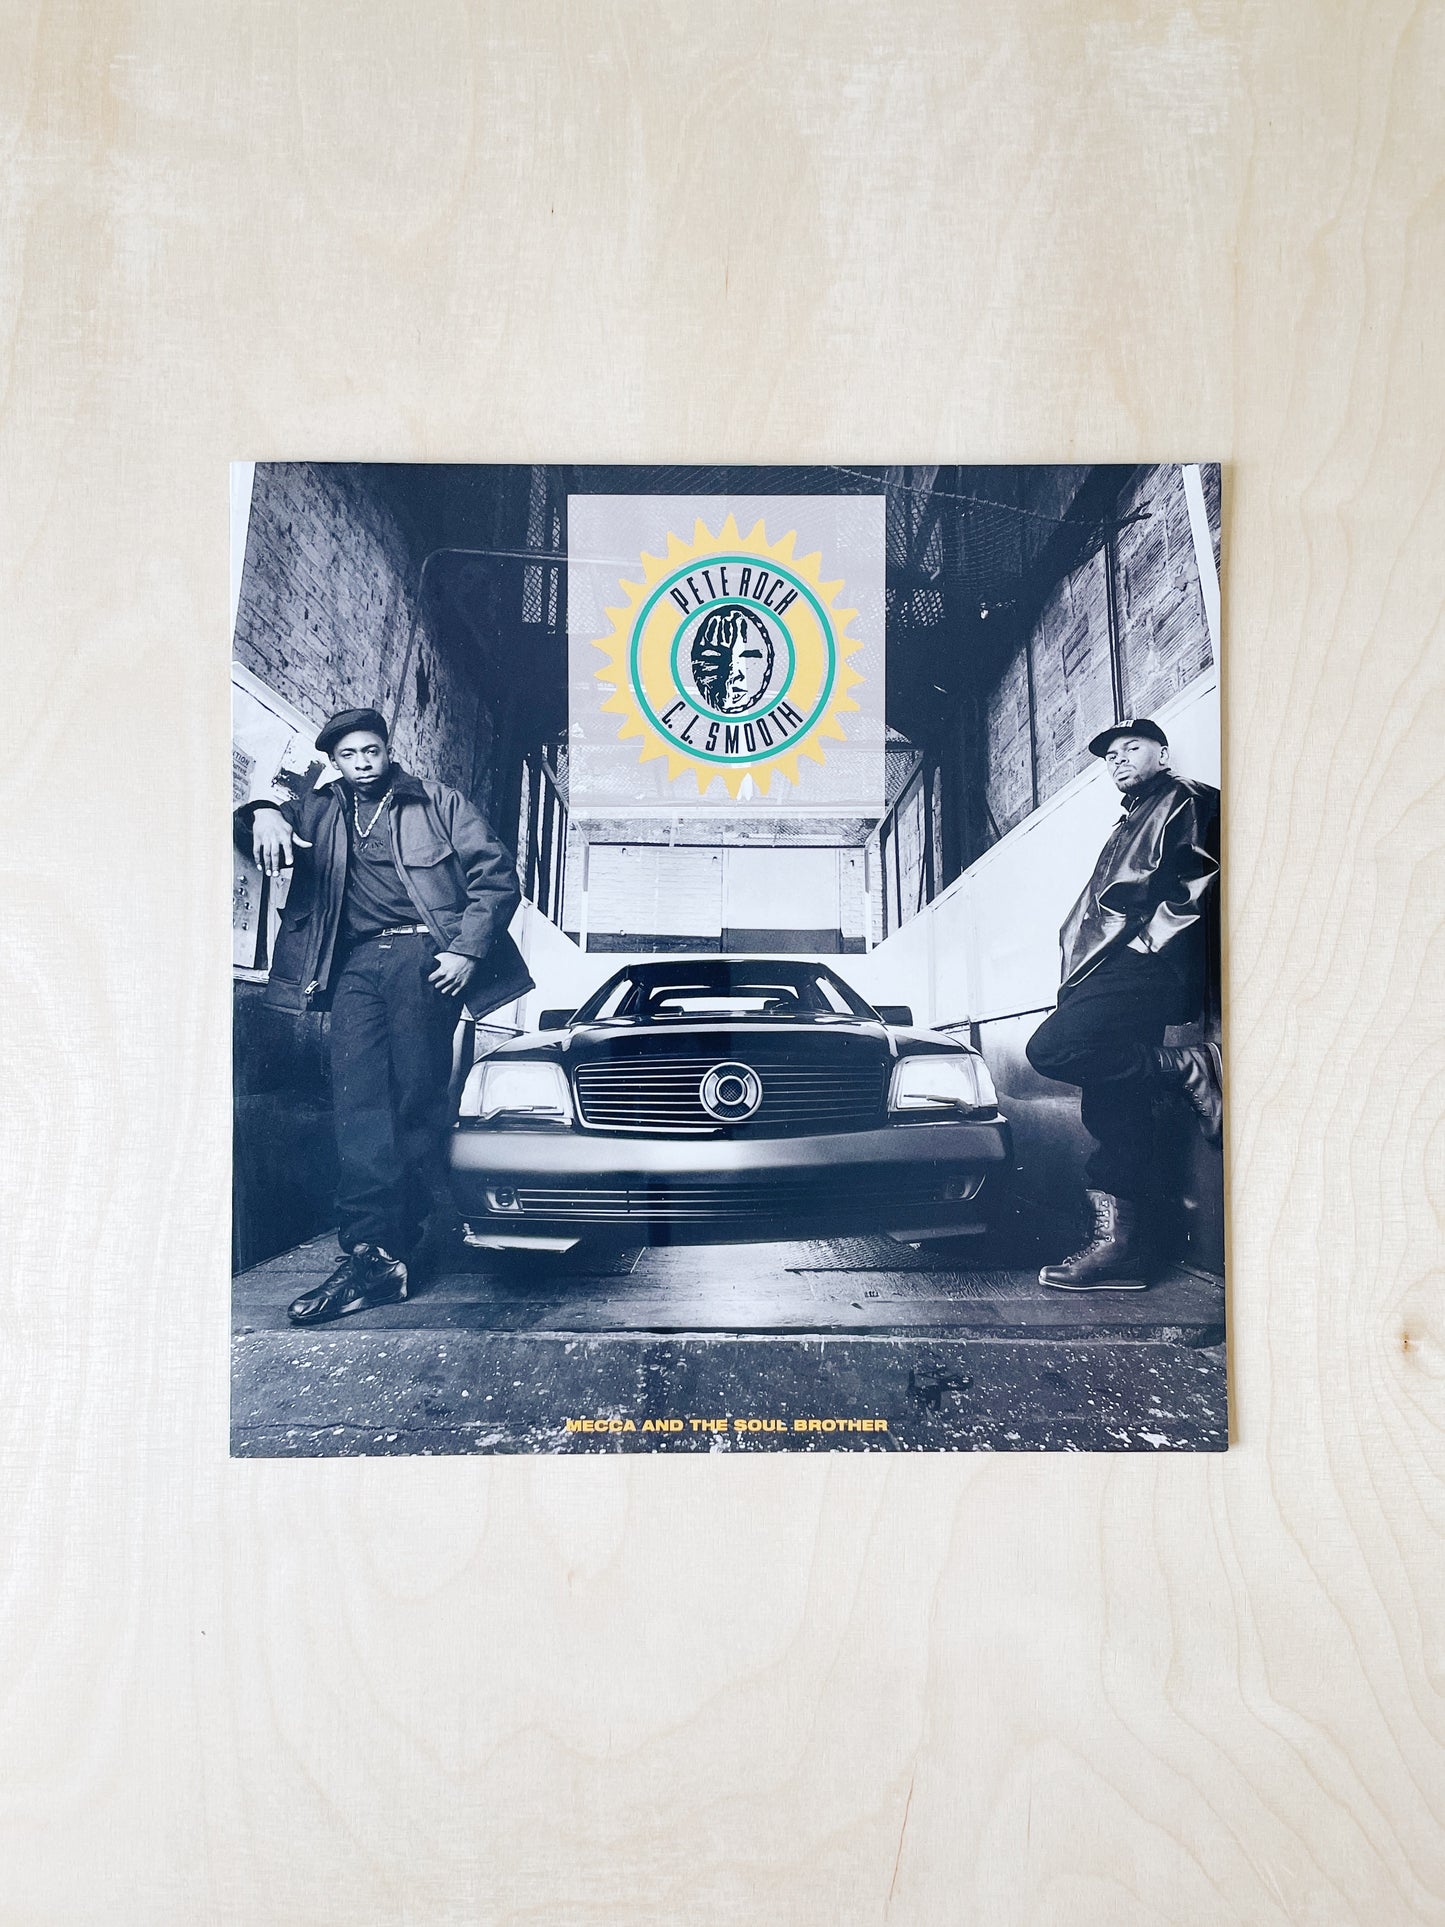 Pete Rock & CL Smooth - Mecca & the Soul Brother LP